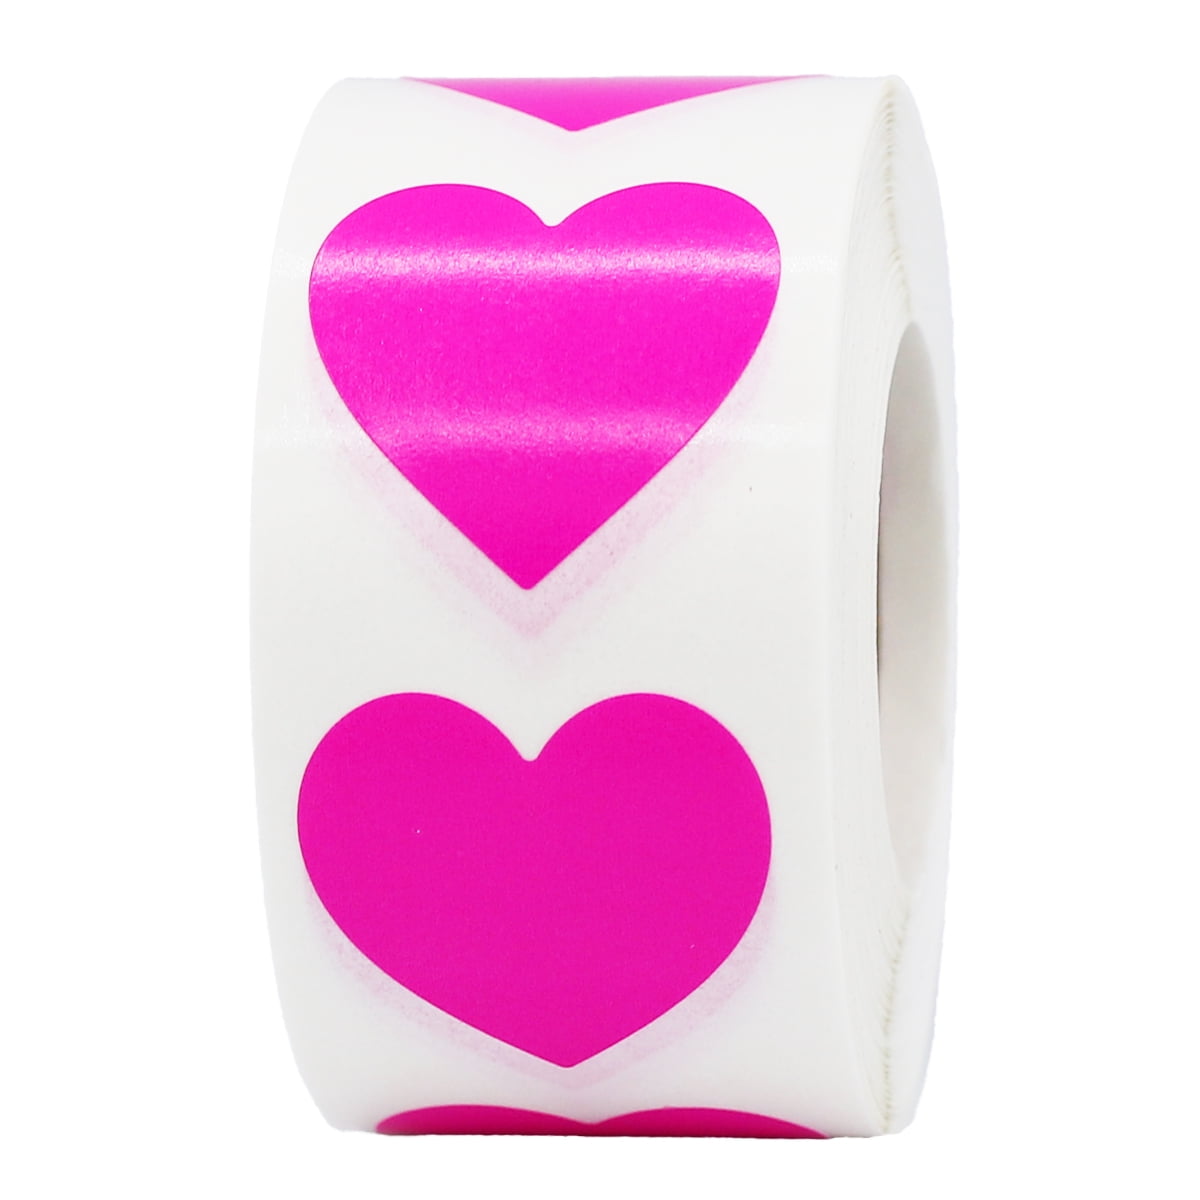 Hot Pink Heart Stickers For Valentine's Day Crafting Scrapbooking 1